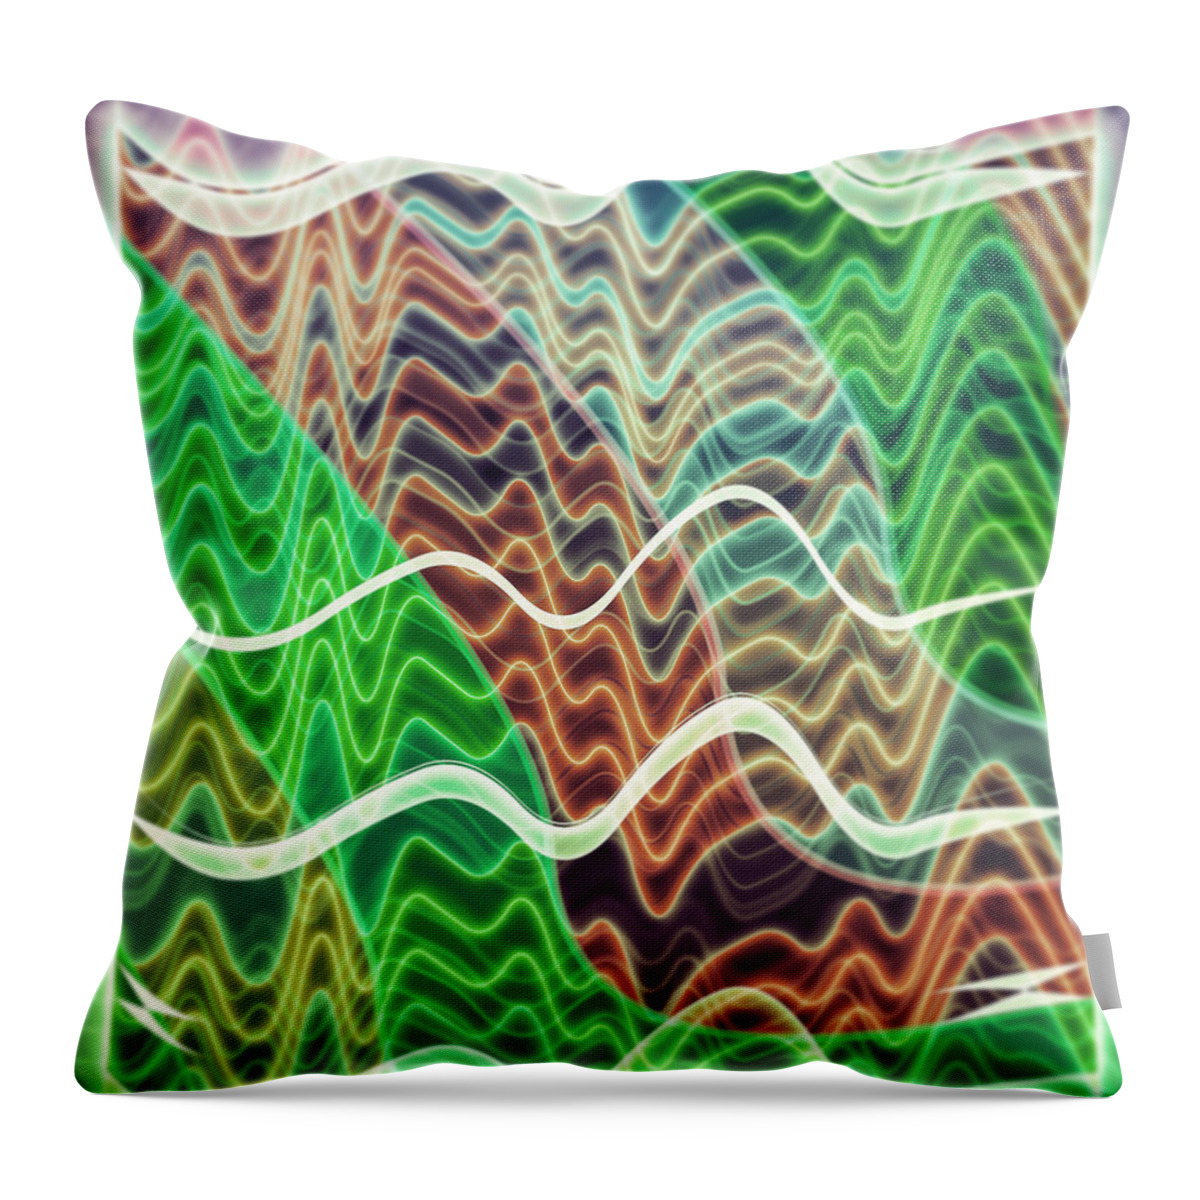 Abstract Throw Pillow featuring the digital art Pattern 27 by Marko Sabotin